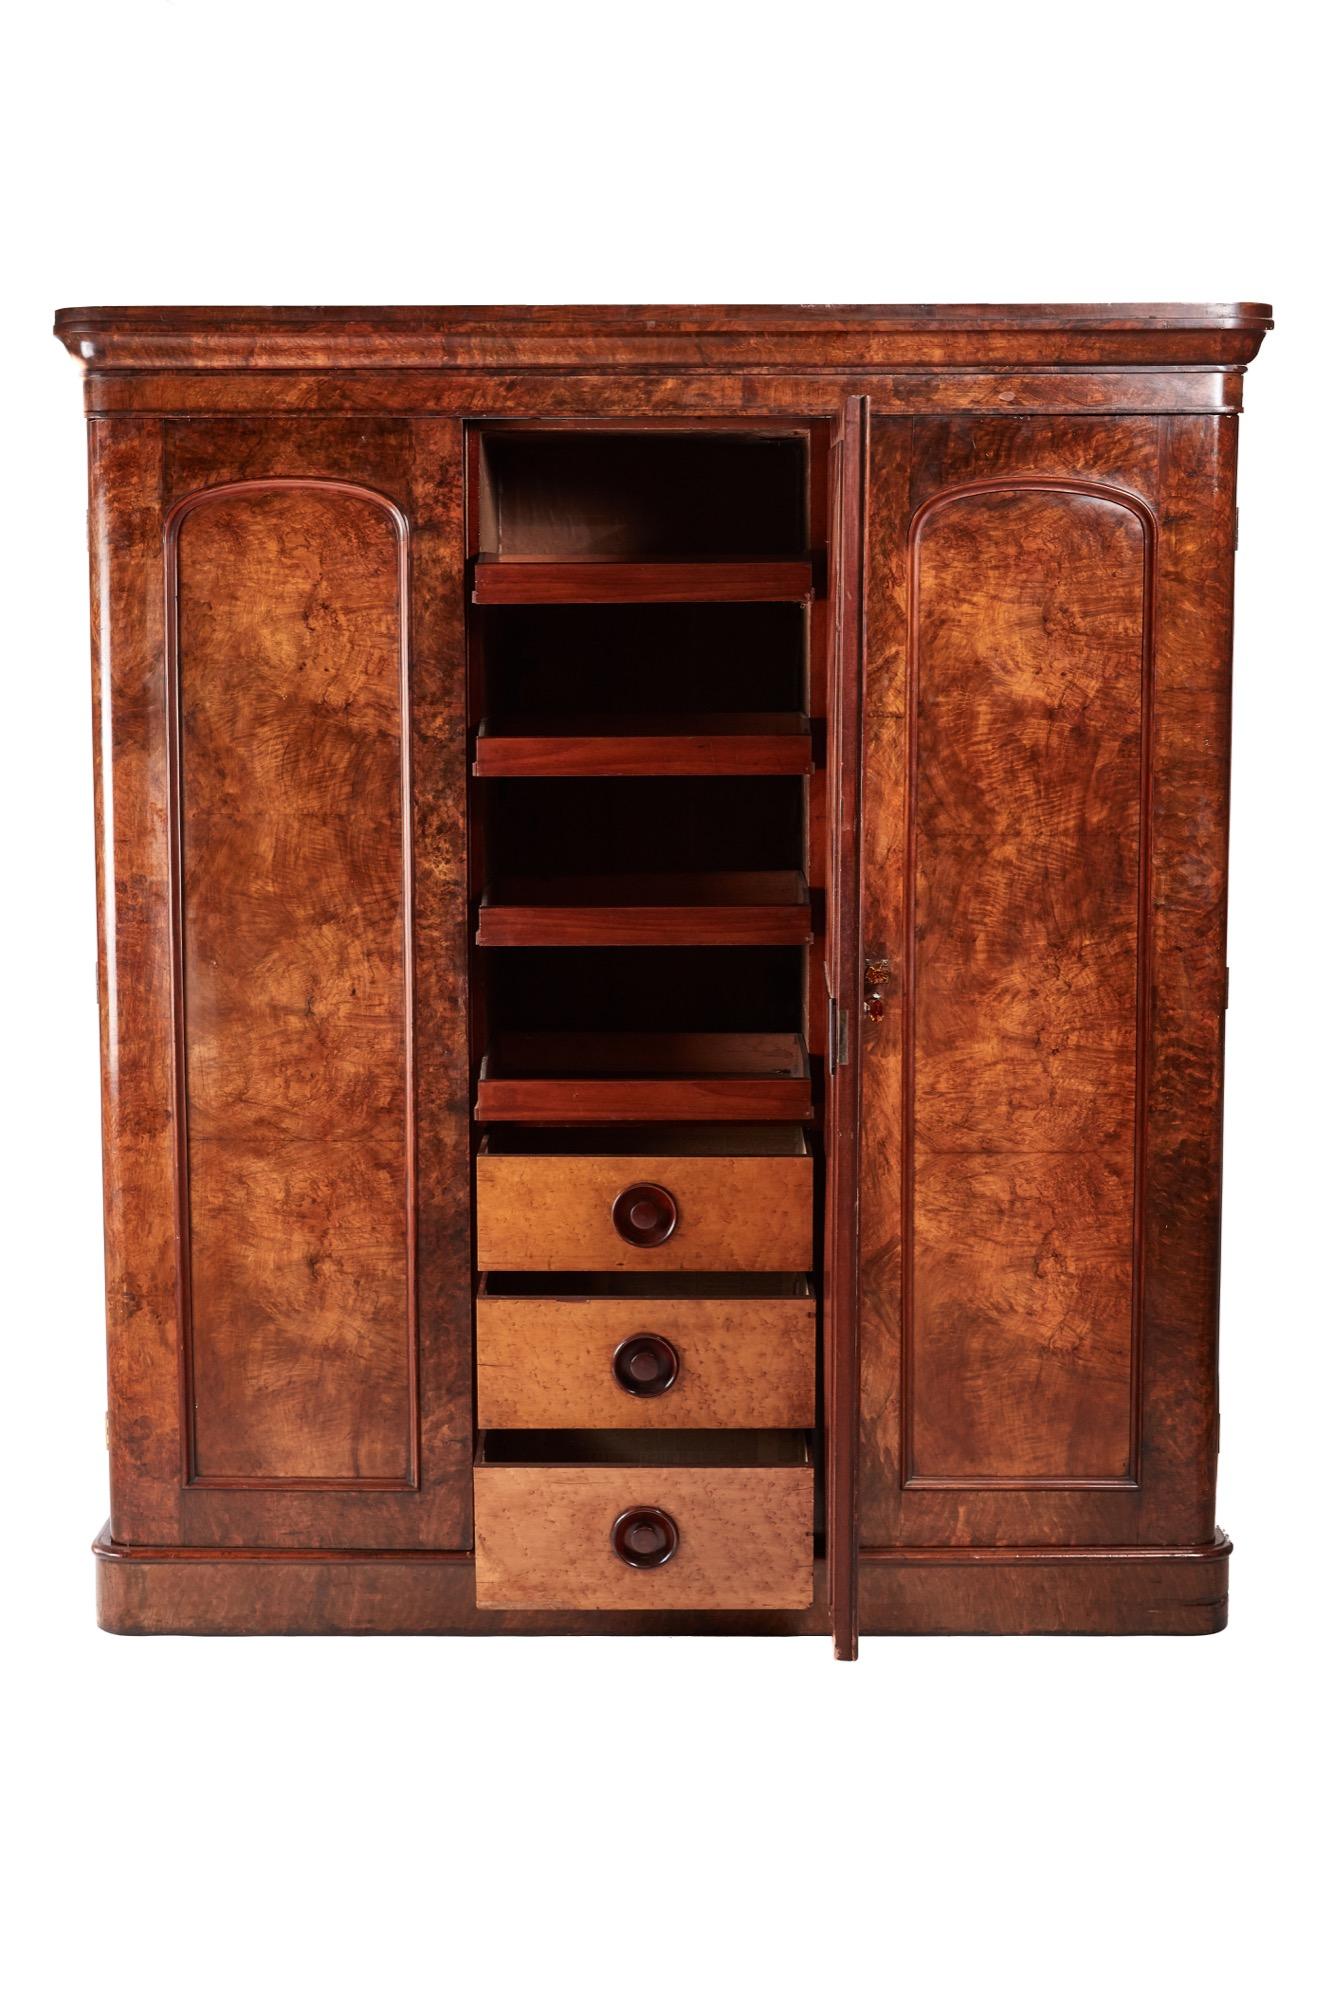 Quality Victorian burr walnut wardrobe having a shaped cornice, two lovely burr walnut panelled doors and one mirror door, opens to reveal a lovely bird's-eye maple fitted interior of drawers and sliding trays, standing on a plinth base
Lovely